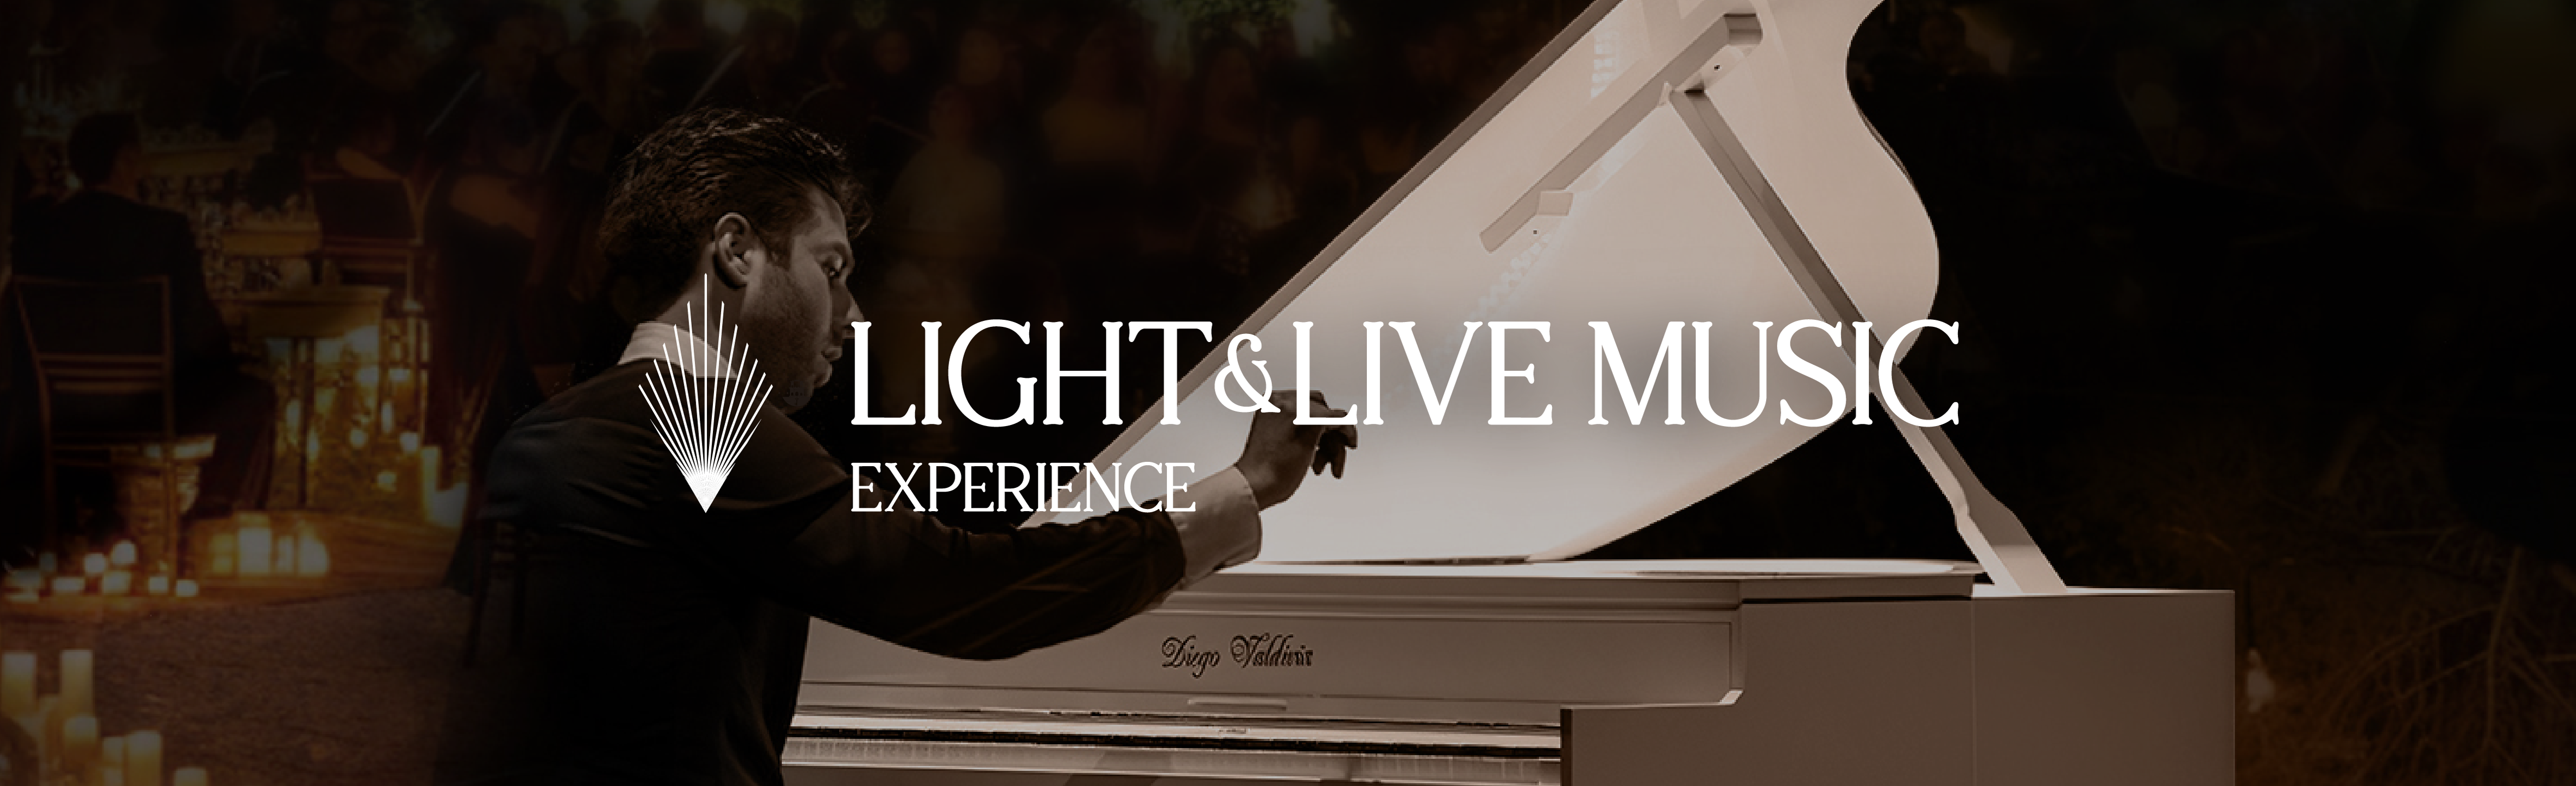 light-and-live-music-experience-algeciras-660e564b0aae12.04411838.png